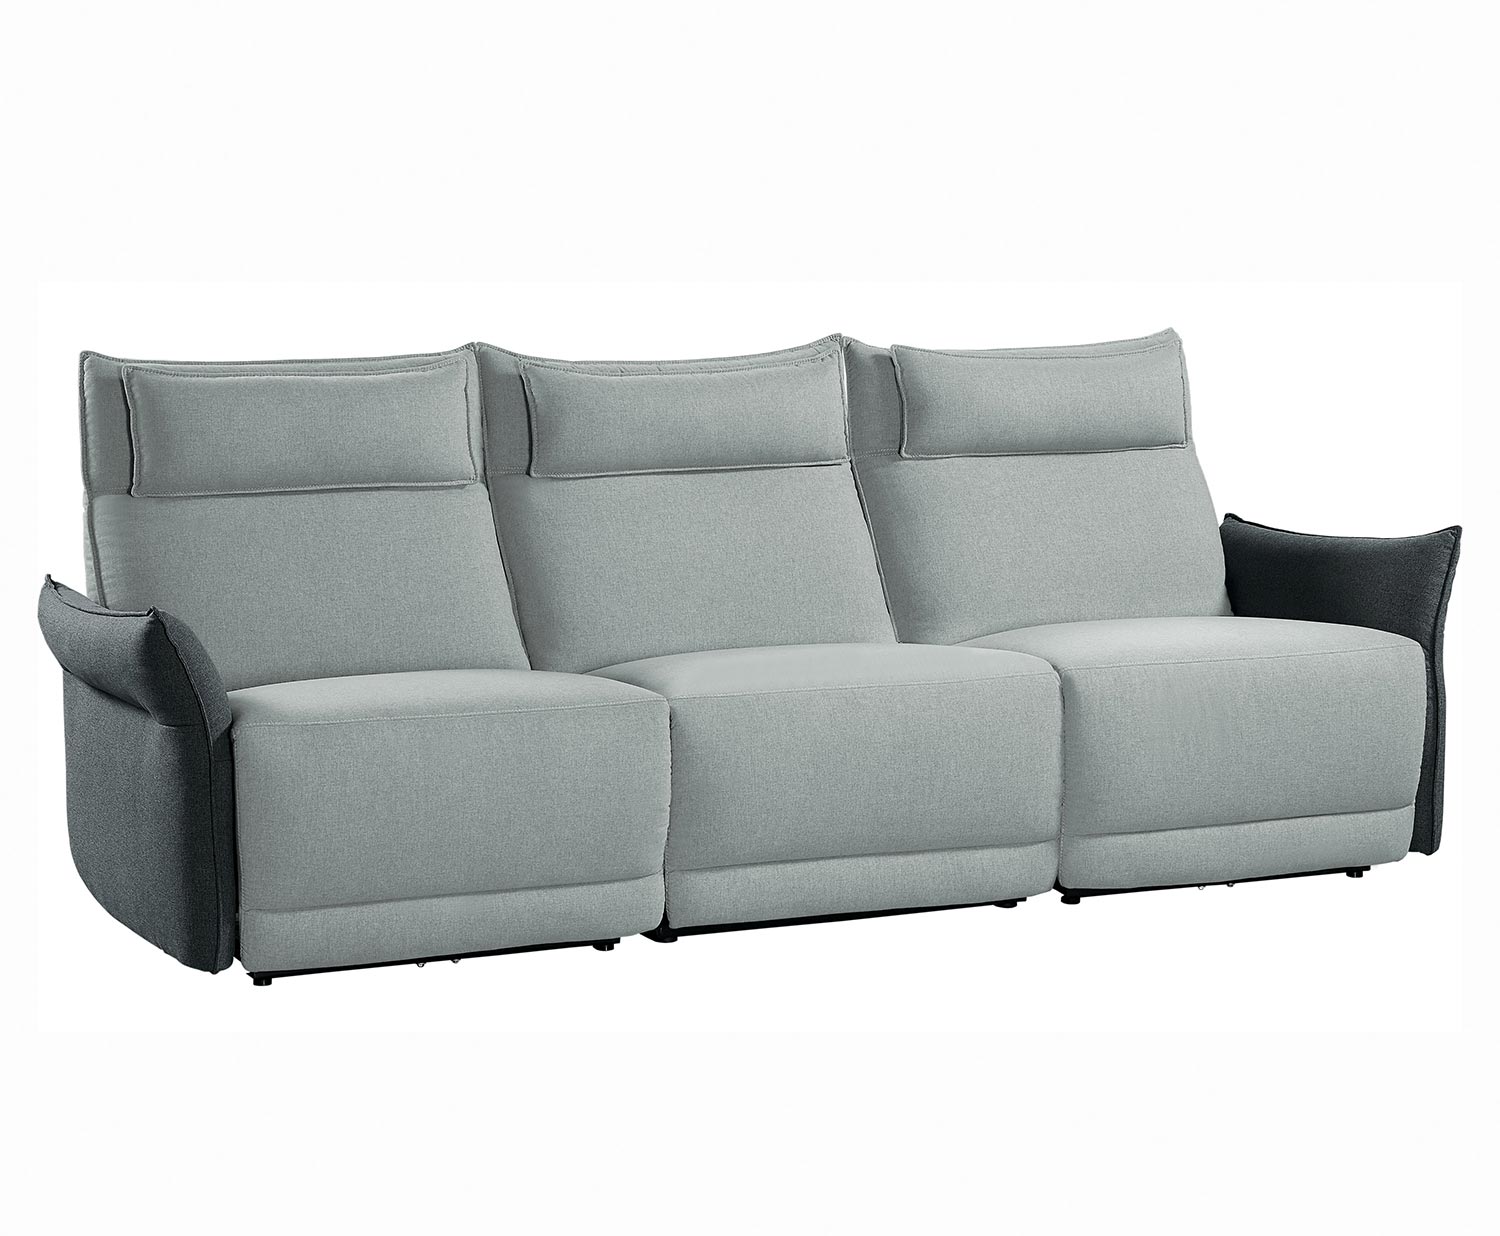 Homelegance Linette Power Double Reclining Sofa with Power Headrests - Gray